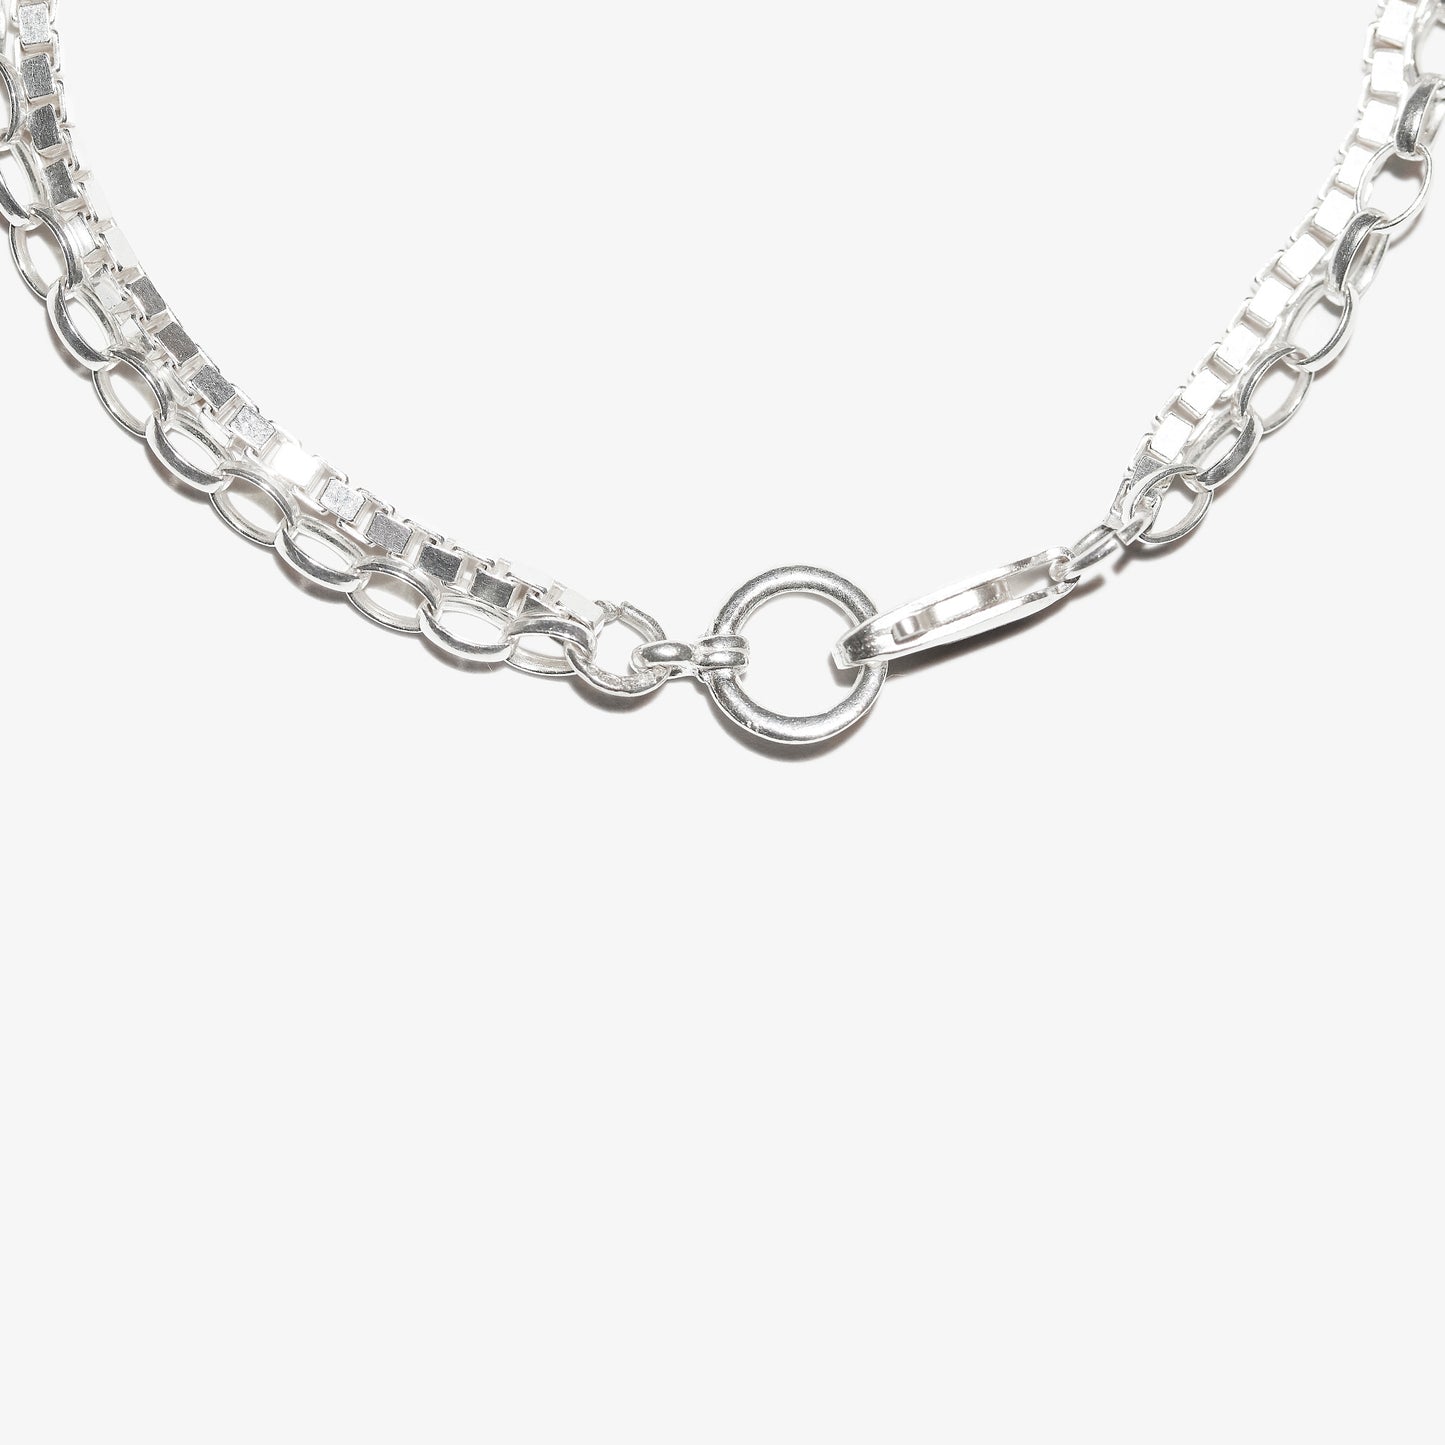 Detailed image of the Duo Venetian Bracelet in sterling silver 